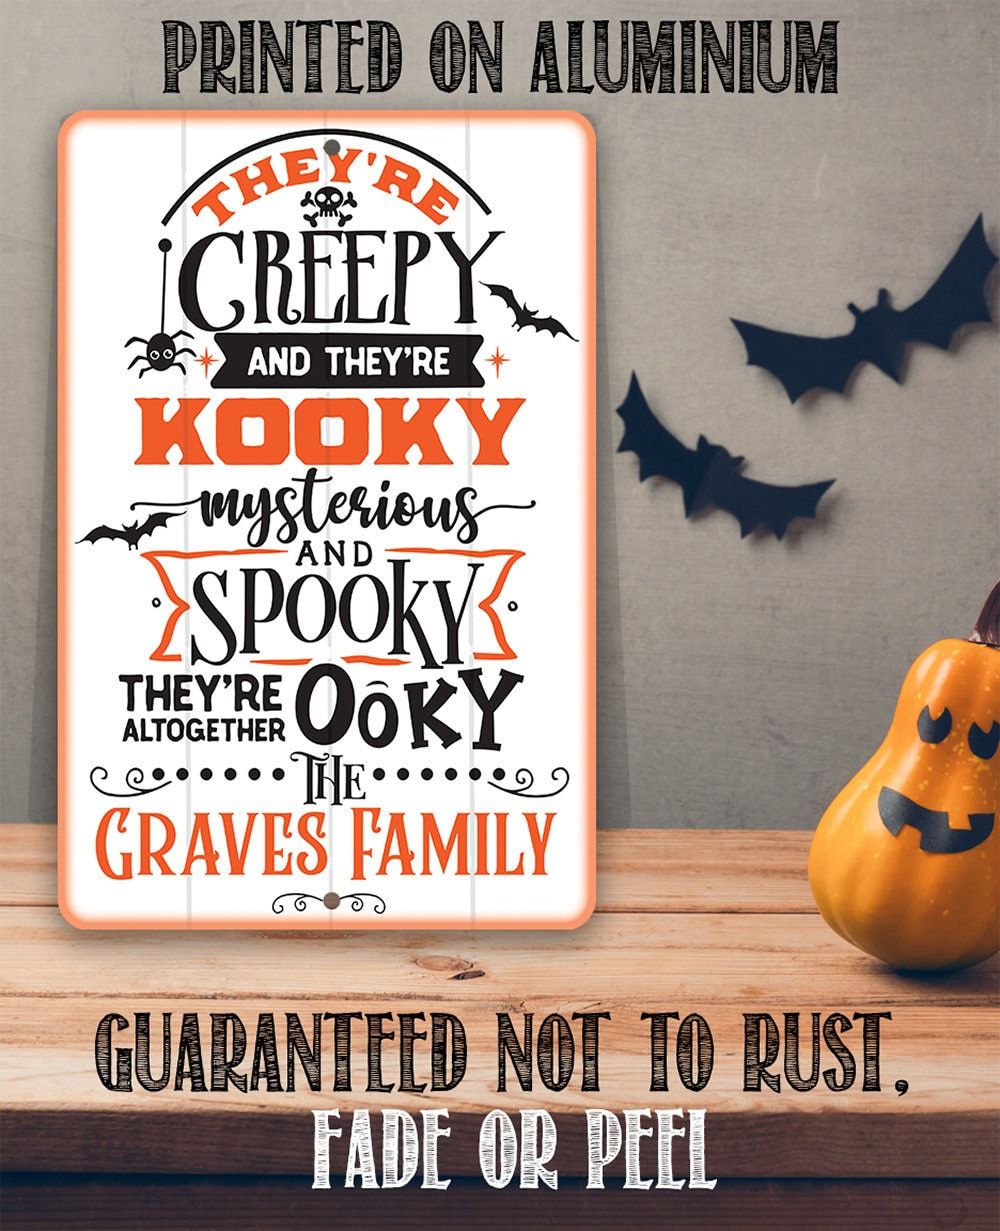 Personalized - They're Creepy Kooky Spooky Ooky - Metal Sign | Lone Star Art.